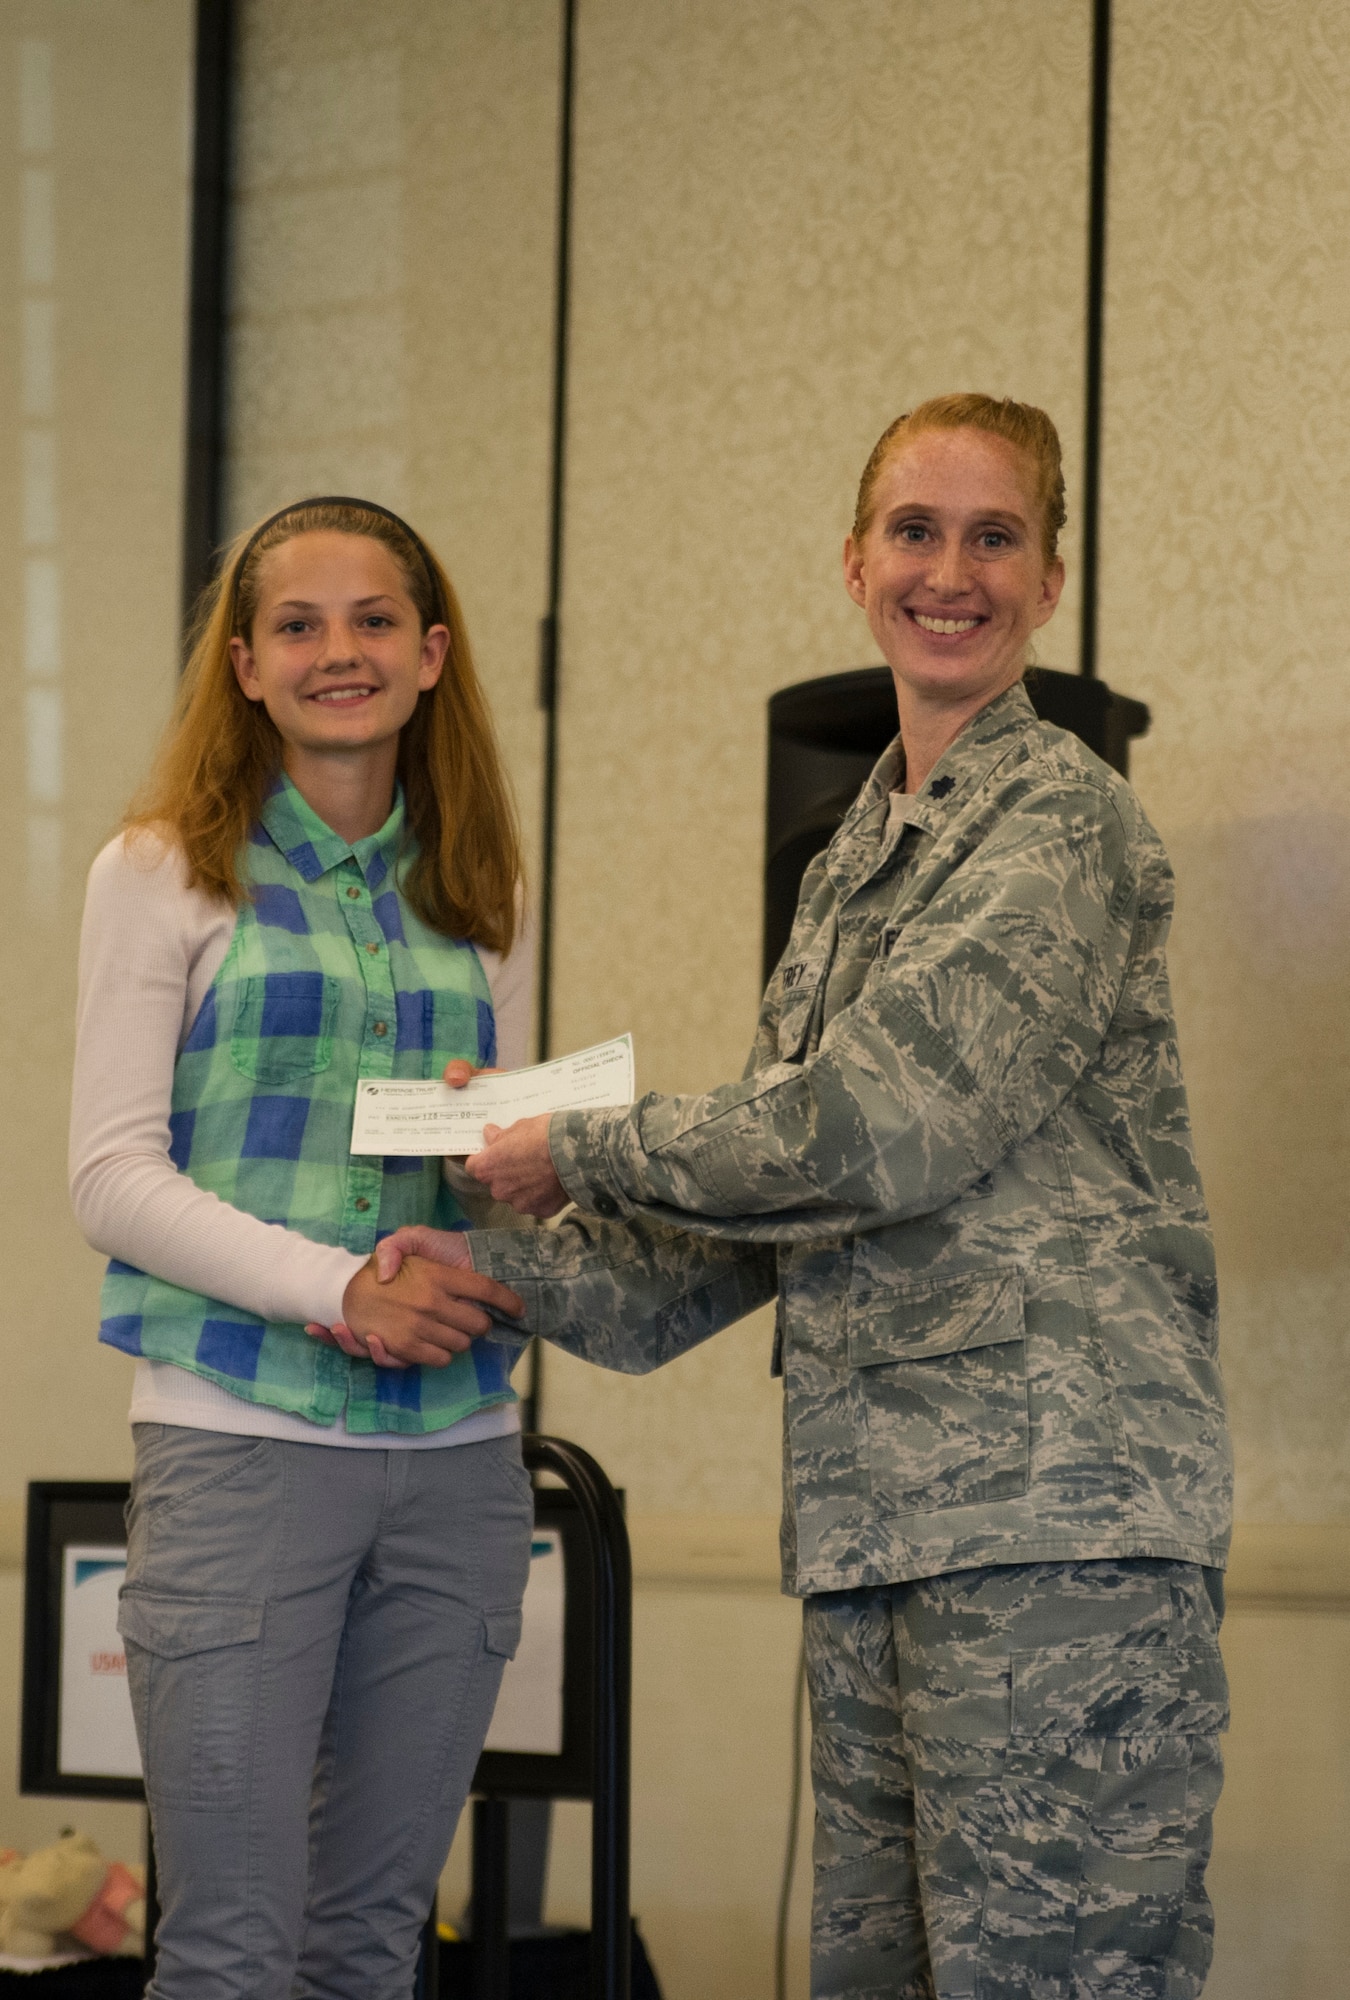 Lt. Col. Mary Jeffrey, 315th Operations Group executive officer, congratulates Jessica Turnbaugh, Hanahan High School, for winning 2nd place in the Women in Aviation Career Day essay contest.Over 130 middle and high school girls from 12 Lowcountry schools visited Joint Base Charleston March 22 to learn about jobs in aviation as part of the 315th Airlift Wing’s 9th annual Women in Aviation Career Day. (U.S. Air Force photo by Senior Airman Jonathan Lane)